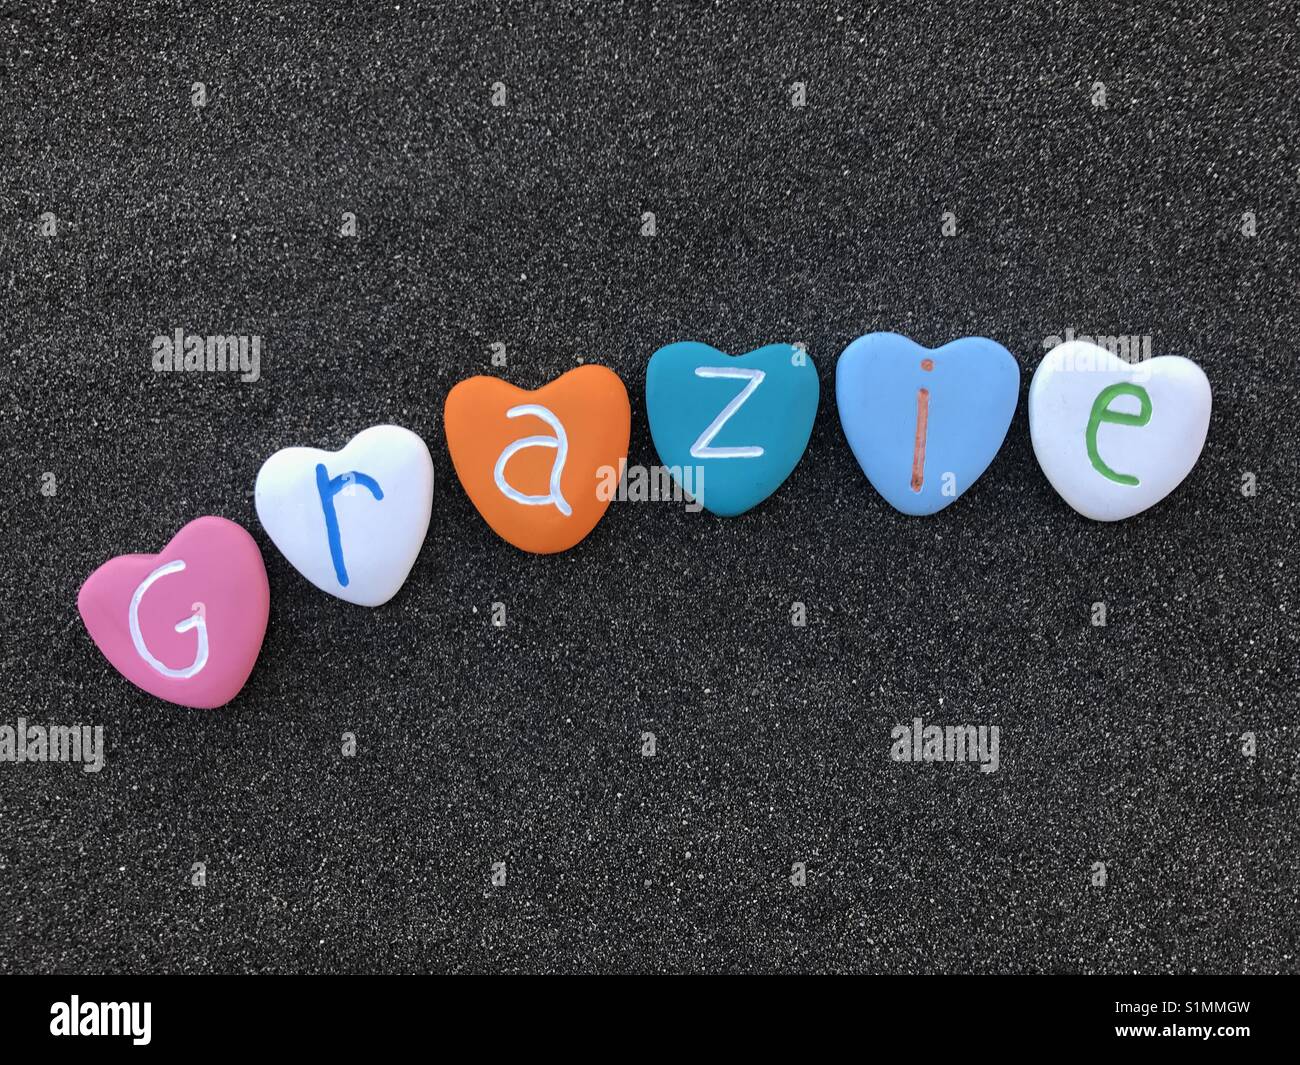 Grazie, italian thank you with colored heart stones over black volcanic sand Stock Photo